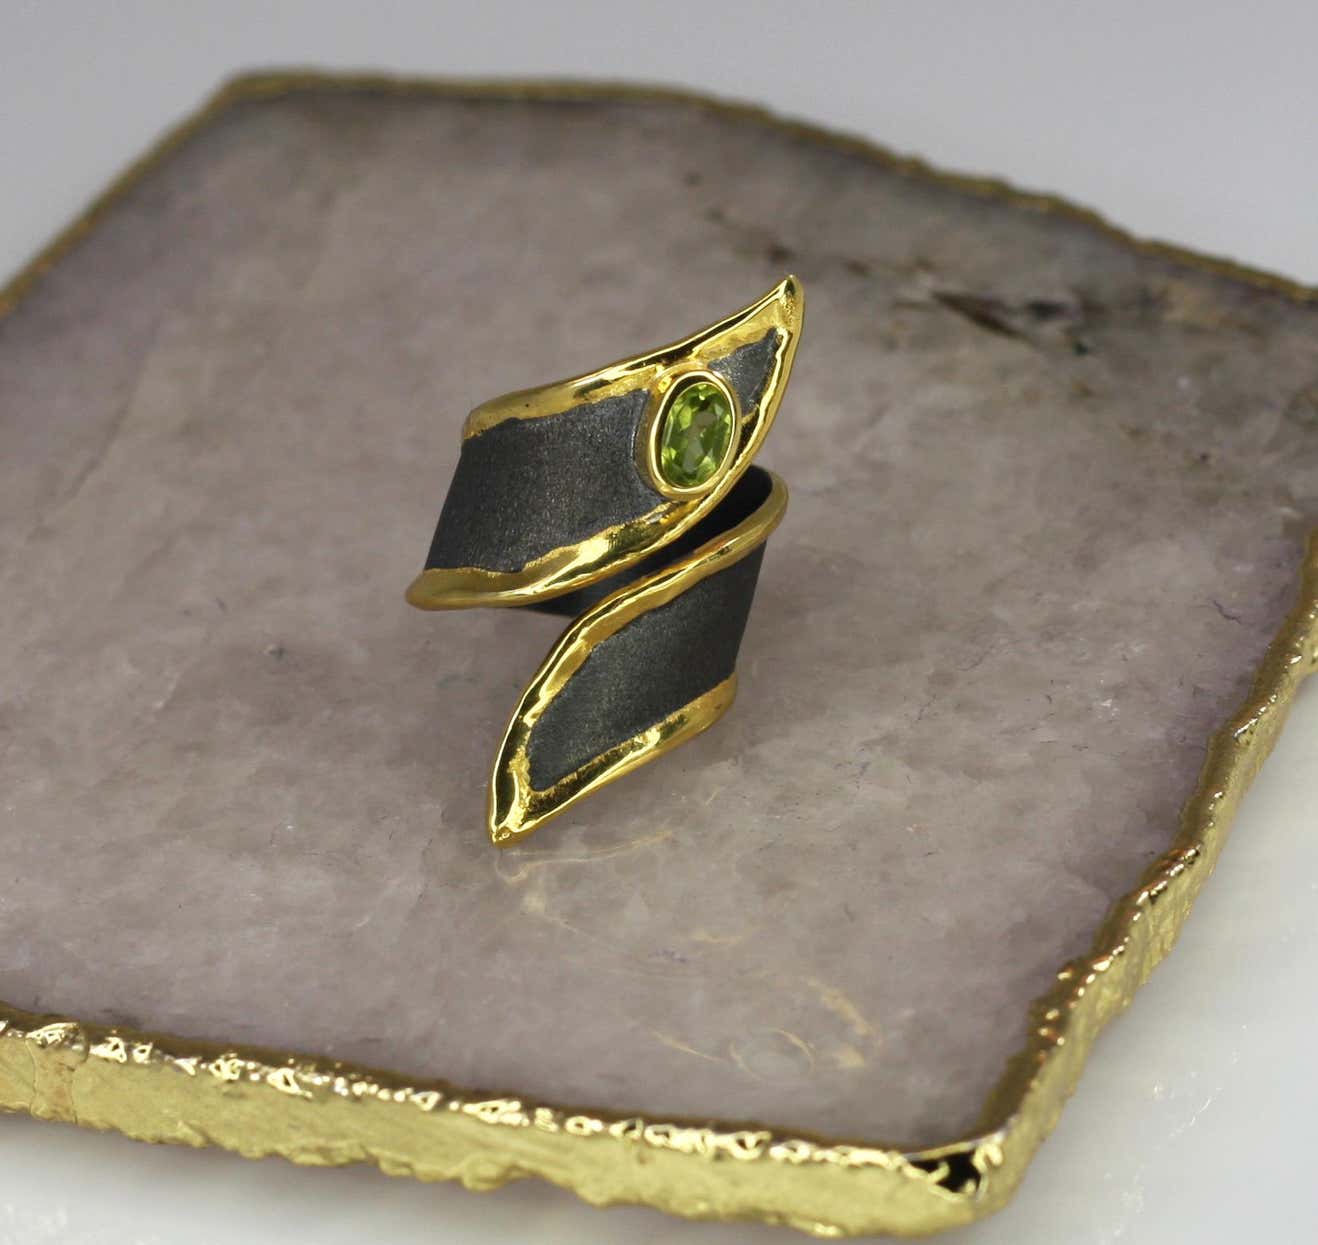 Eclyps Peridot Silver Ring Finished with Ruthenium and 24 Karat Gold